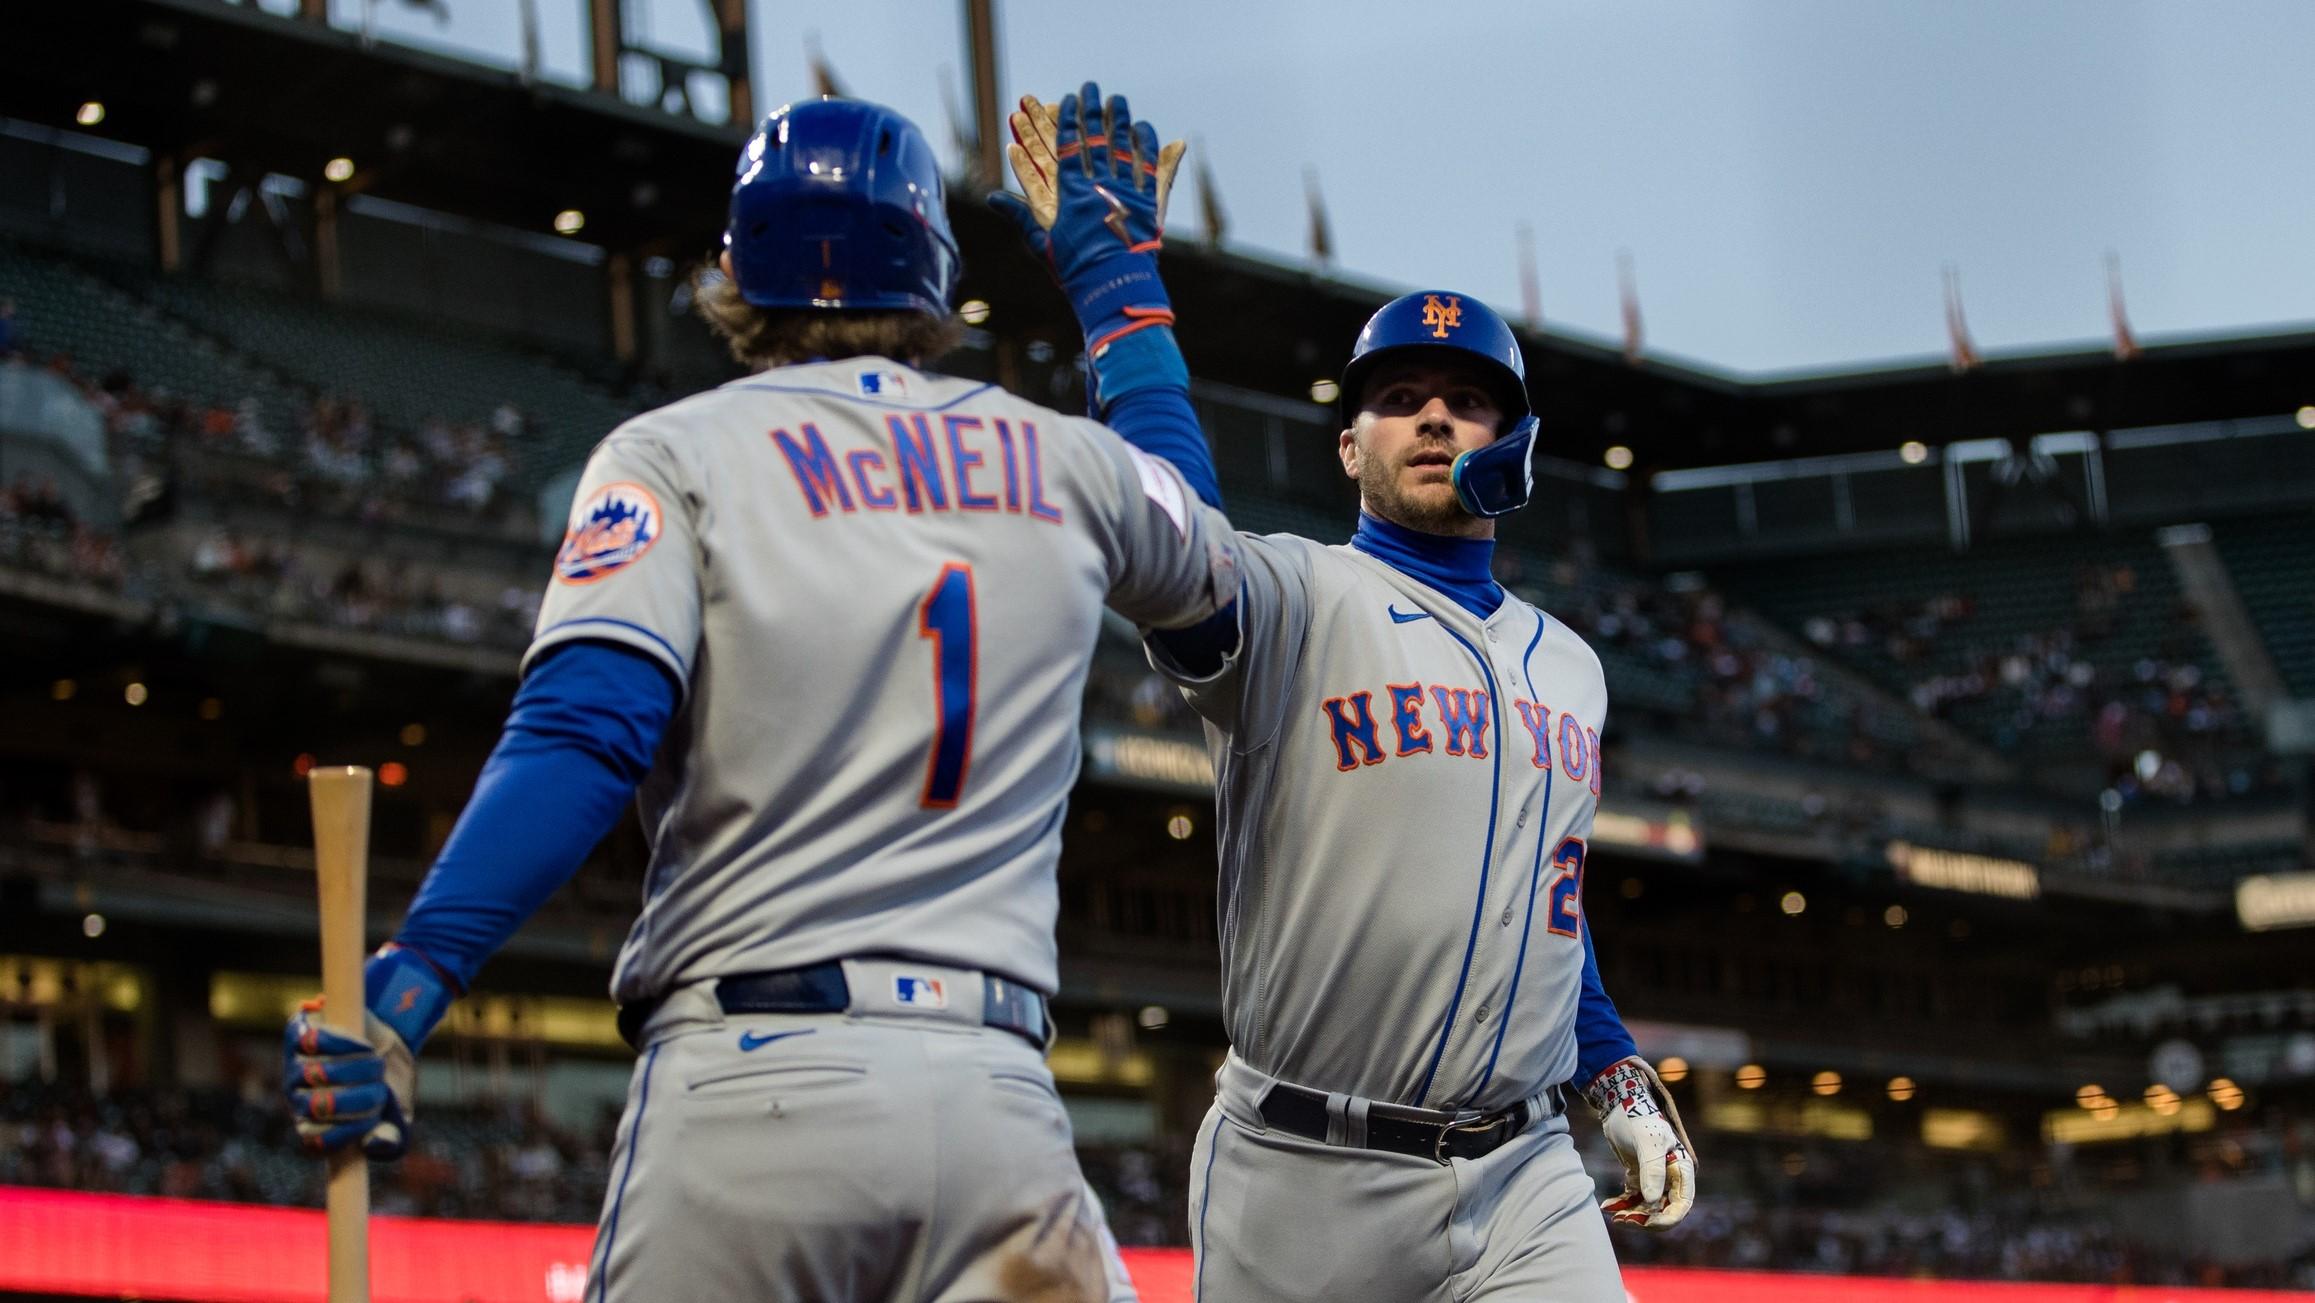 Apr 20, 2023; San Francisco, California, USA; New York Mets first baseman Pete Alonso (20) is congratulated by right fielder Jeff McNeil (1) after hitting a two-run home run against the San Francisco Giants during the fourth inning at Oracle Park. / John Hefti-USA TODAY Sports